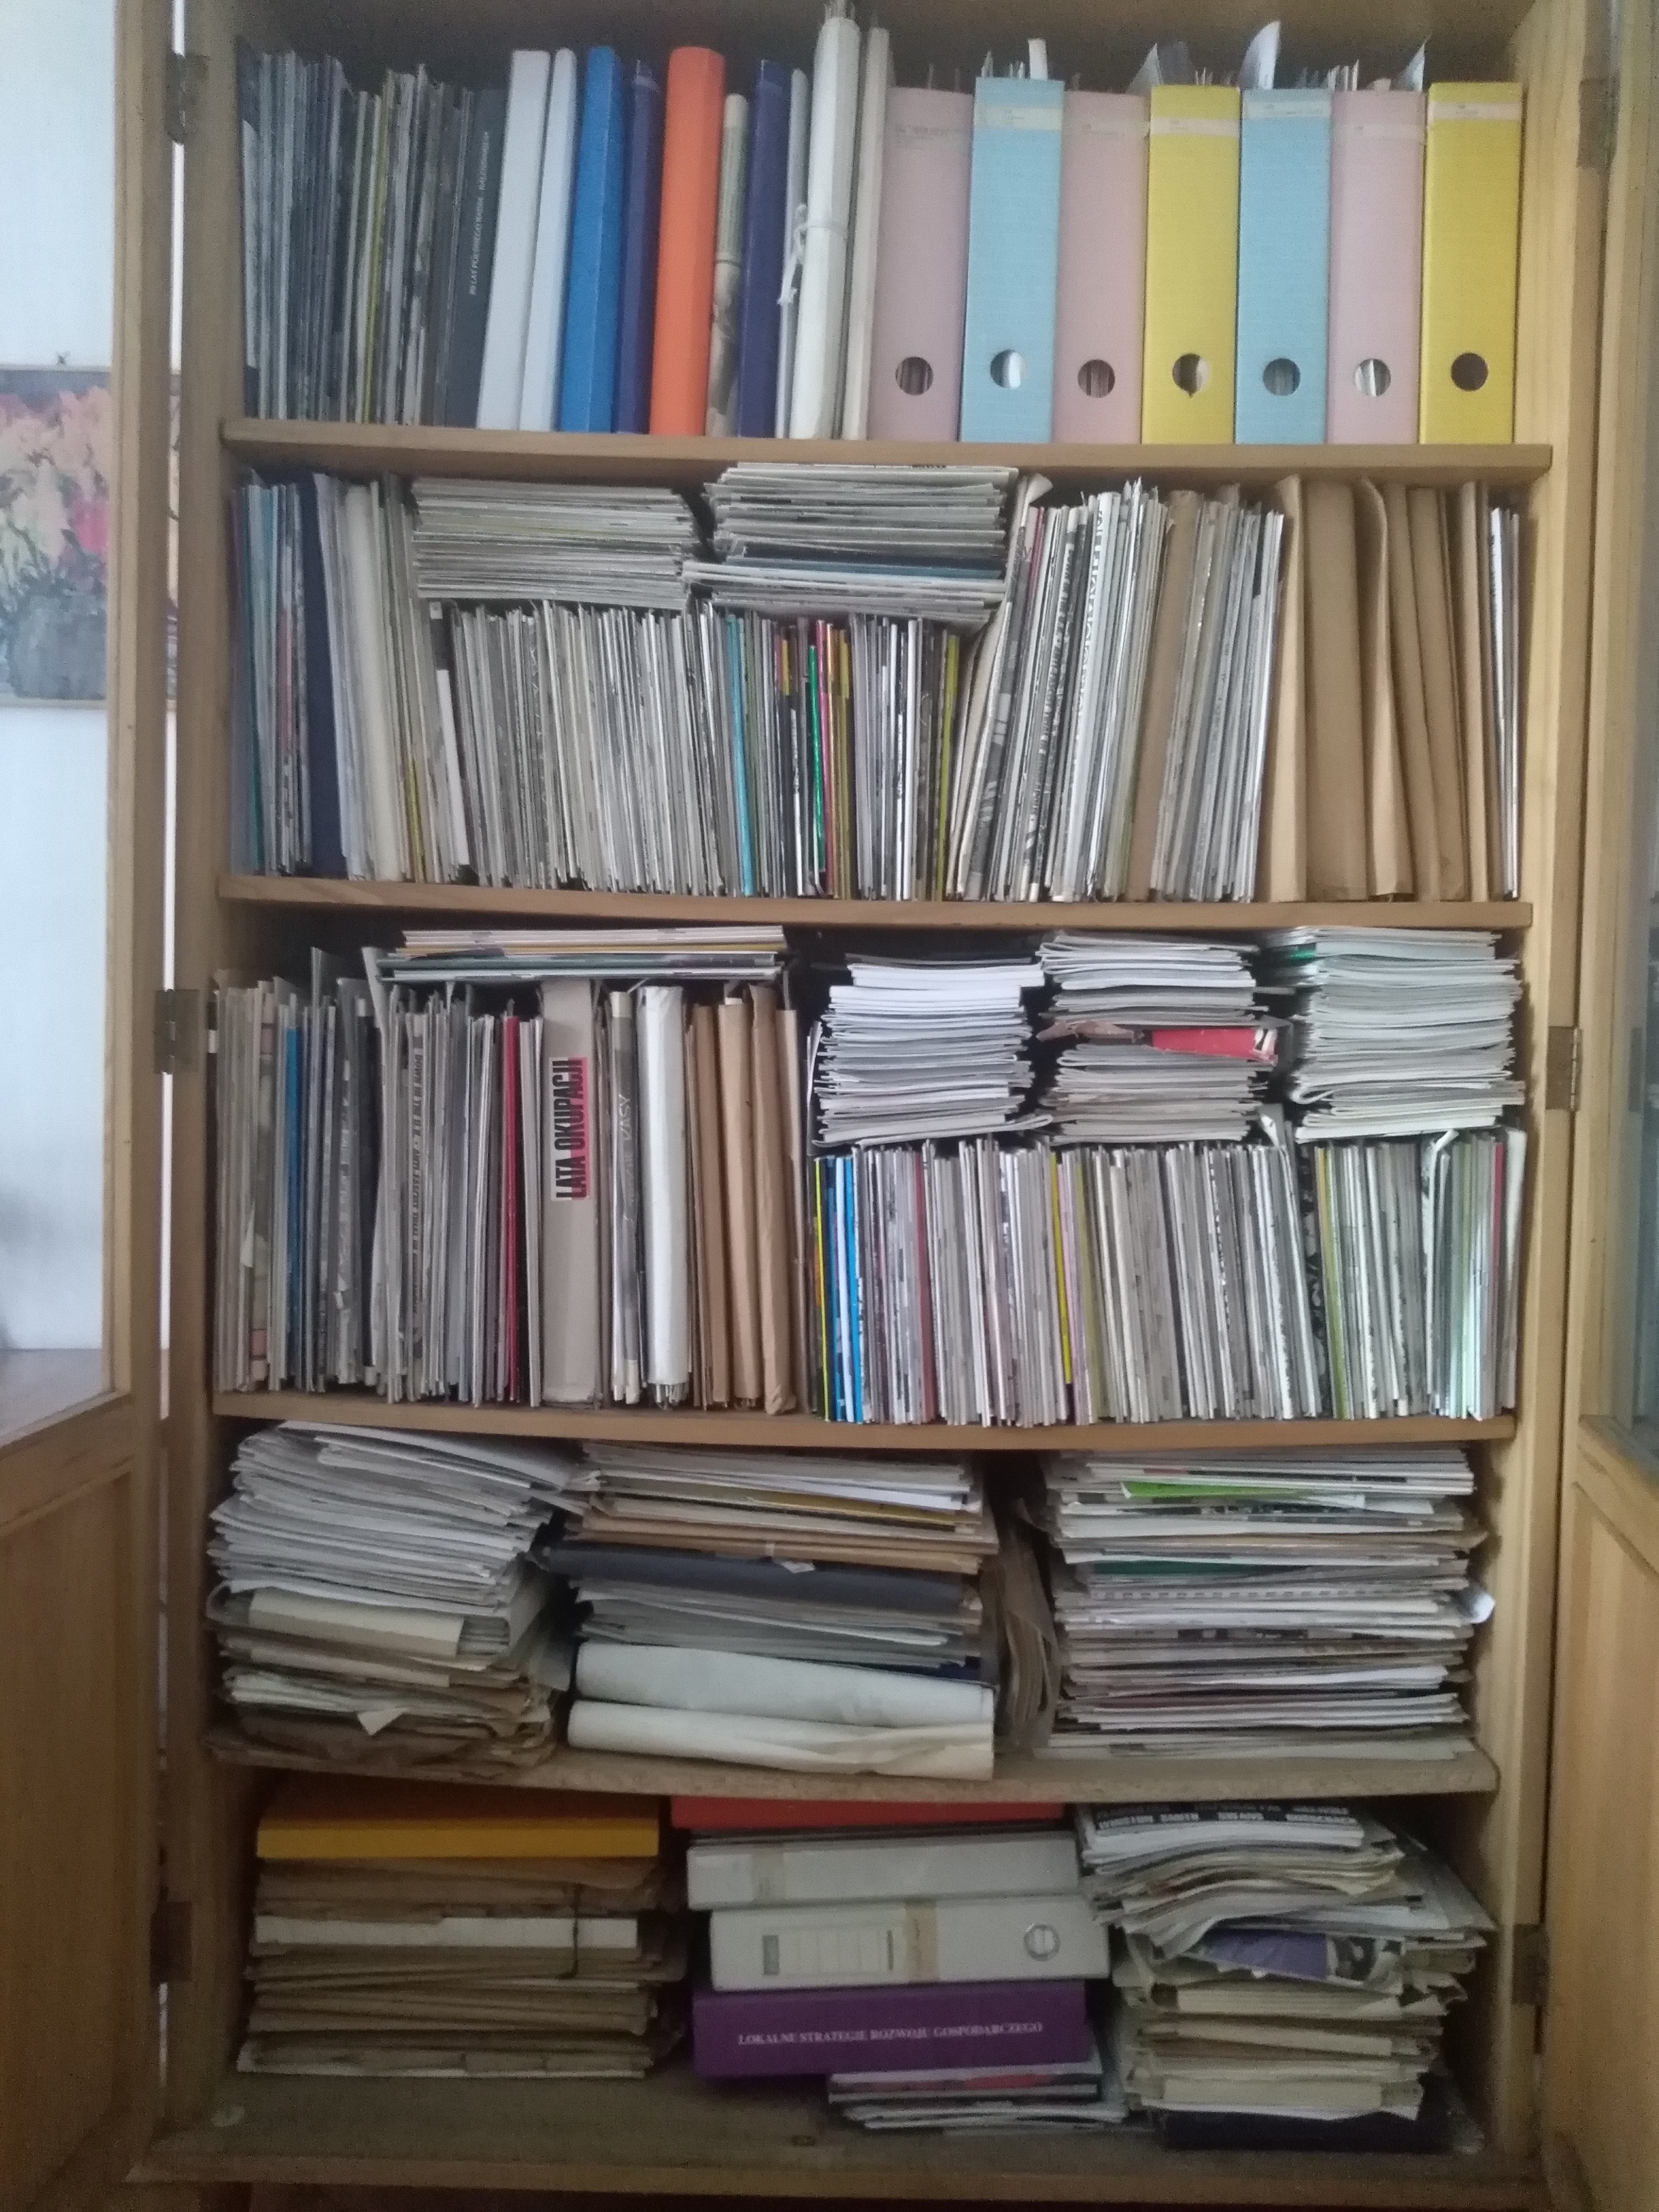 Barbara Fatyga's bookcase with thousands of fanzines, leaflets, and documents.